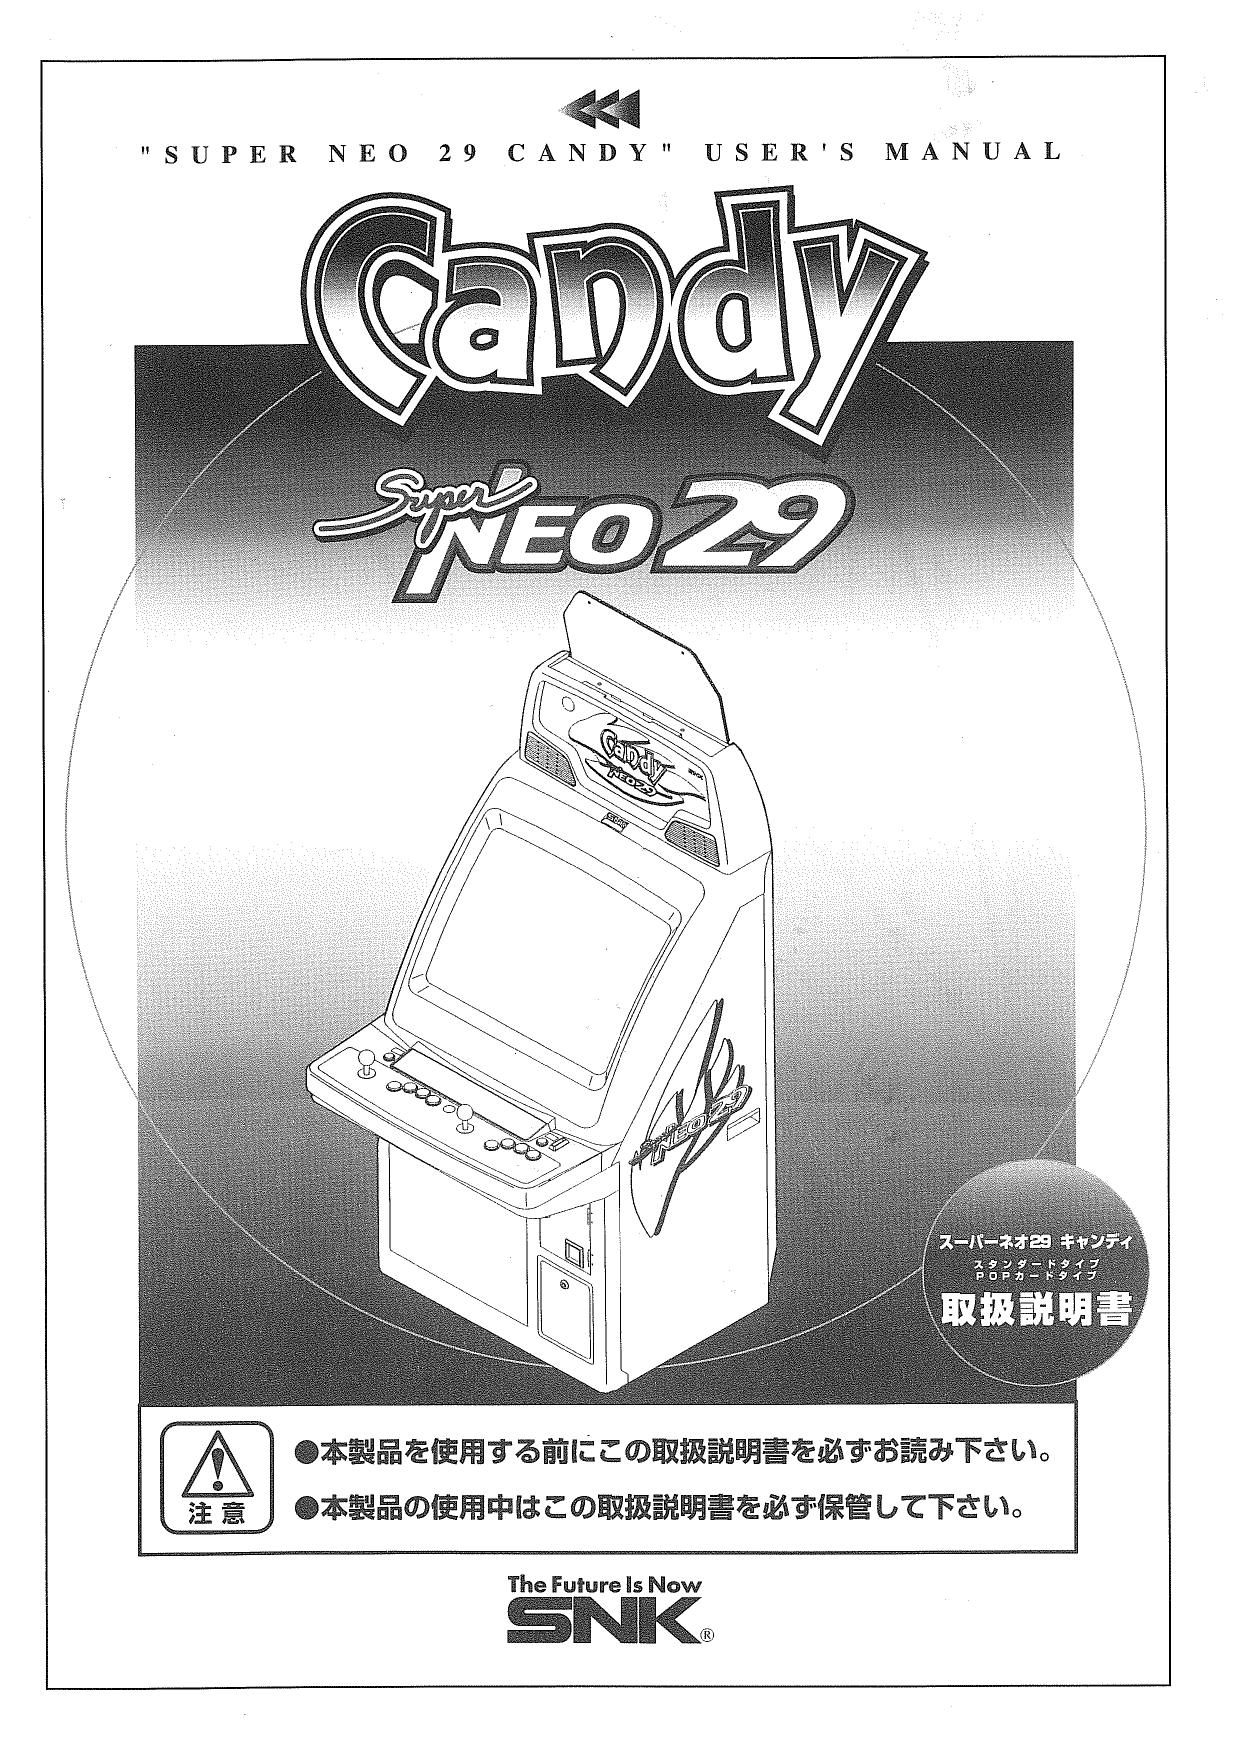 SuperNeo29Candy-Manual